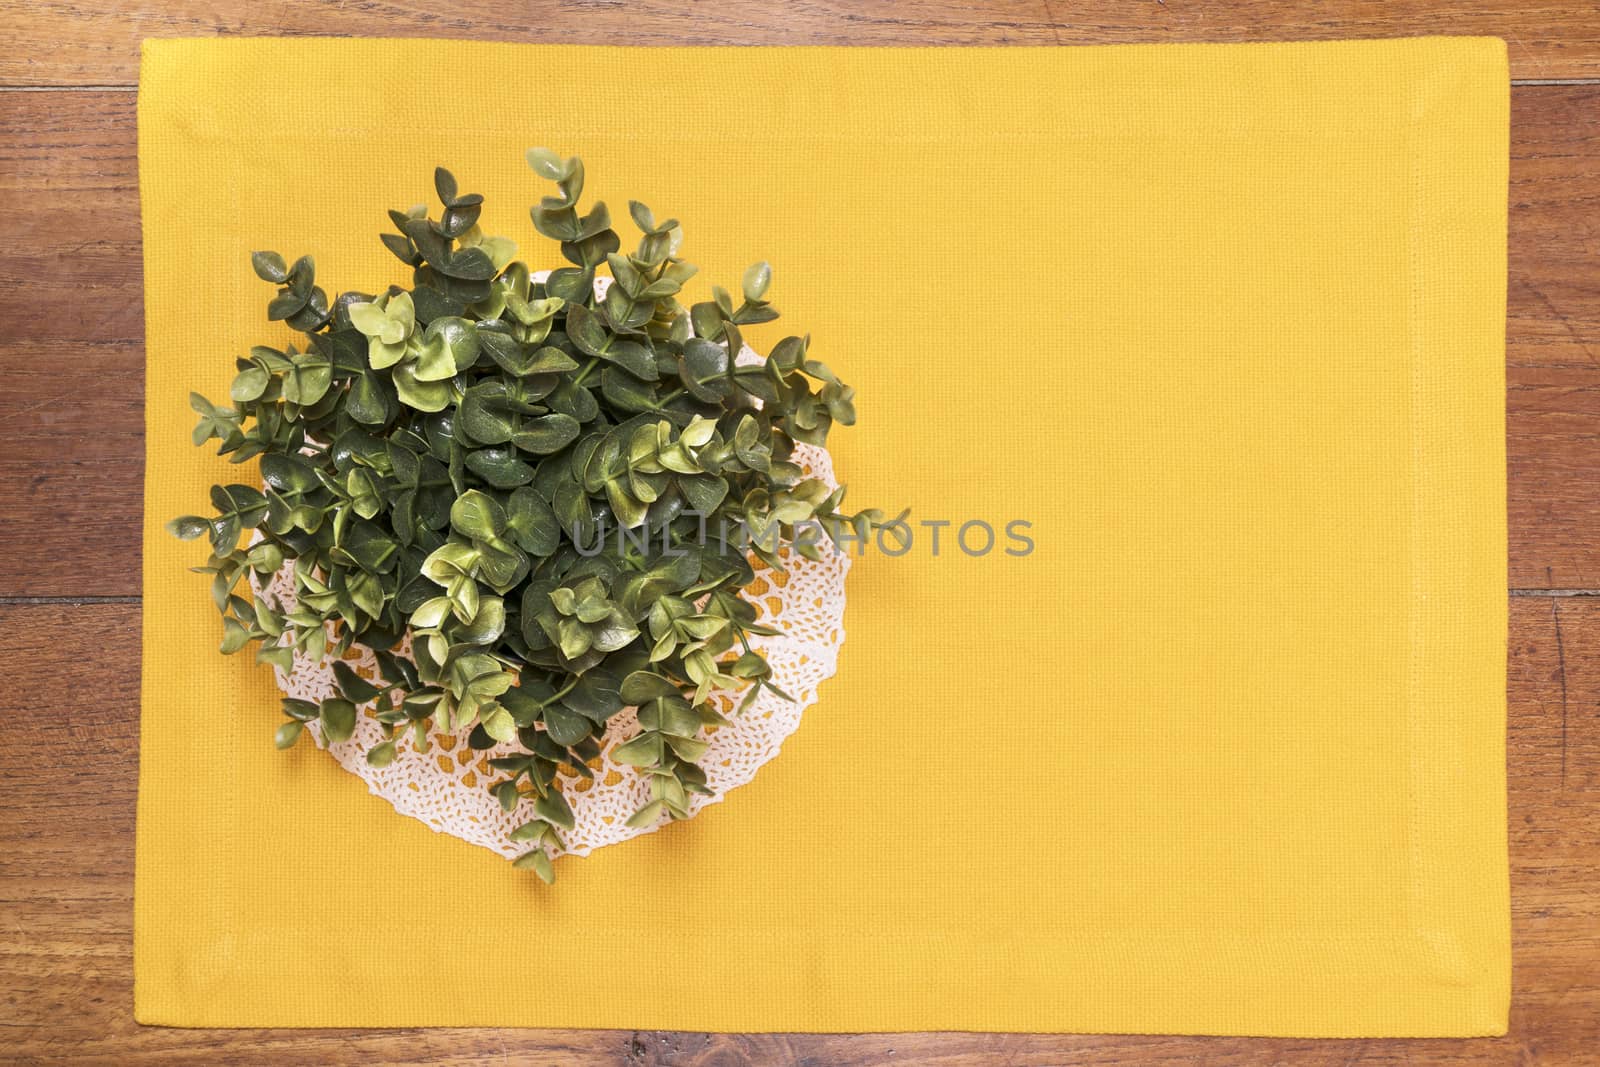 A plant on a wooden table